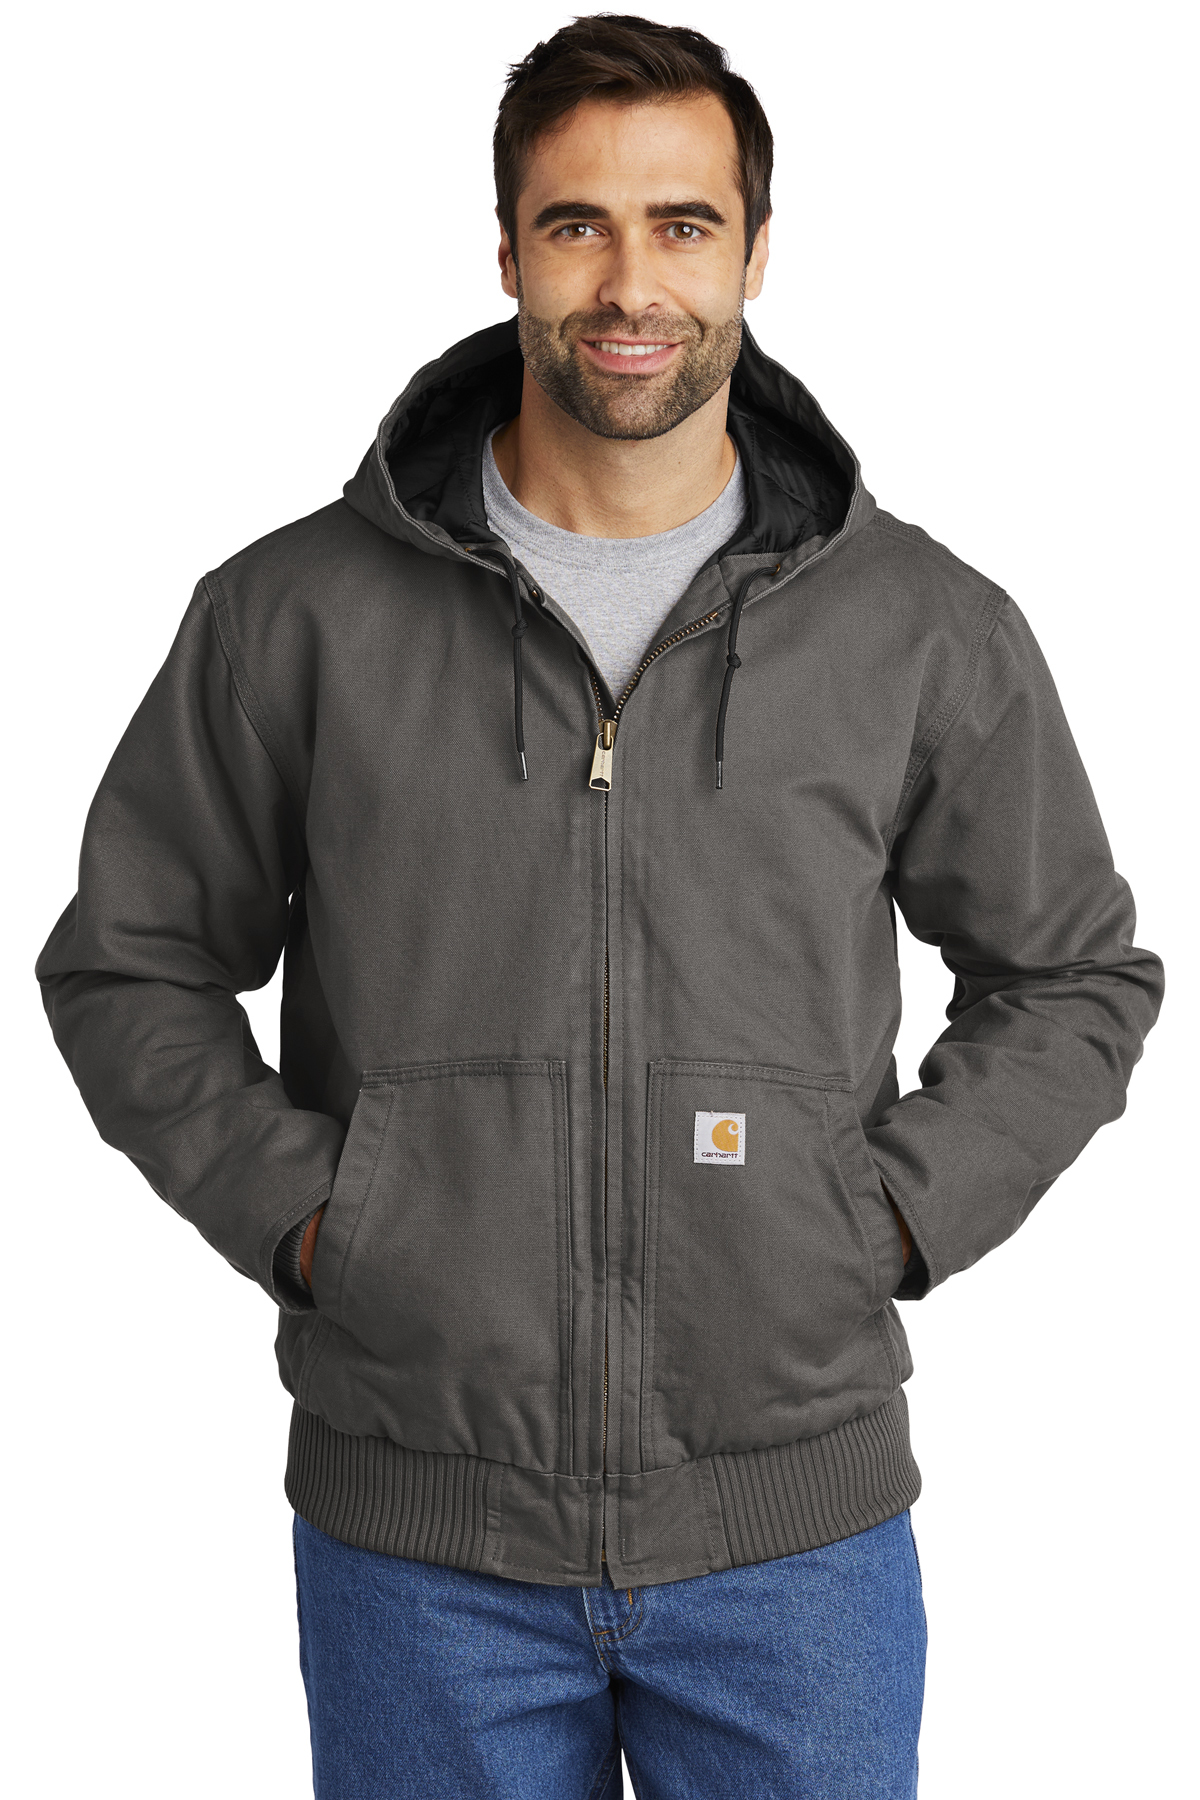 Carhartt Washed Duck Active Jac | Product | Company Casuals